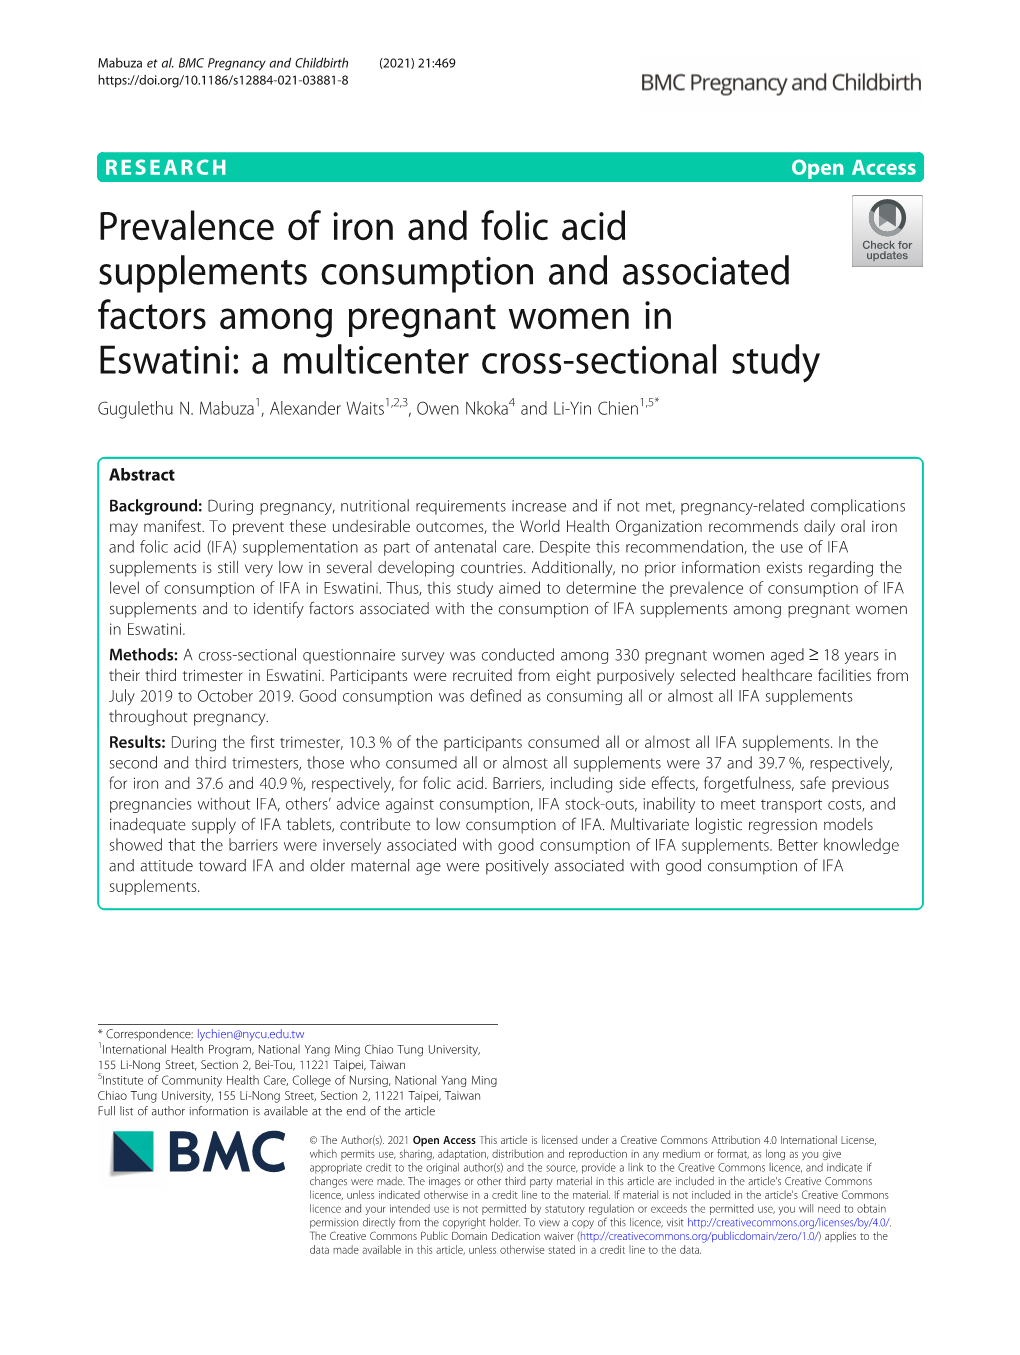 Prevalence of Iron and Folic Acid Supplements Consumption and Associated Factors Among Pregnant Women in Eswatini: a Multicenter Cross-Sectional Study Gugulethu N